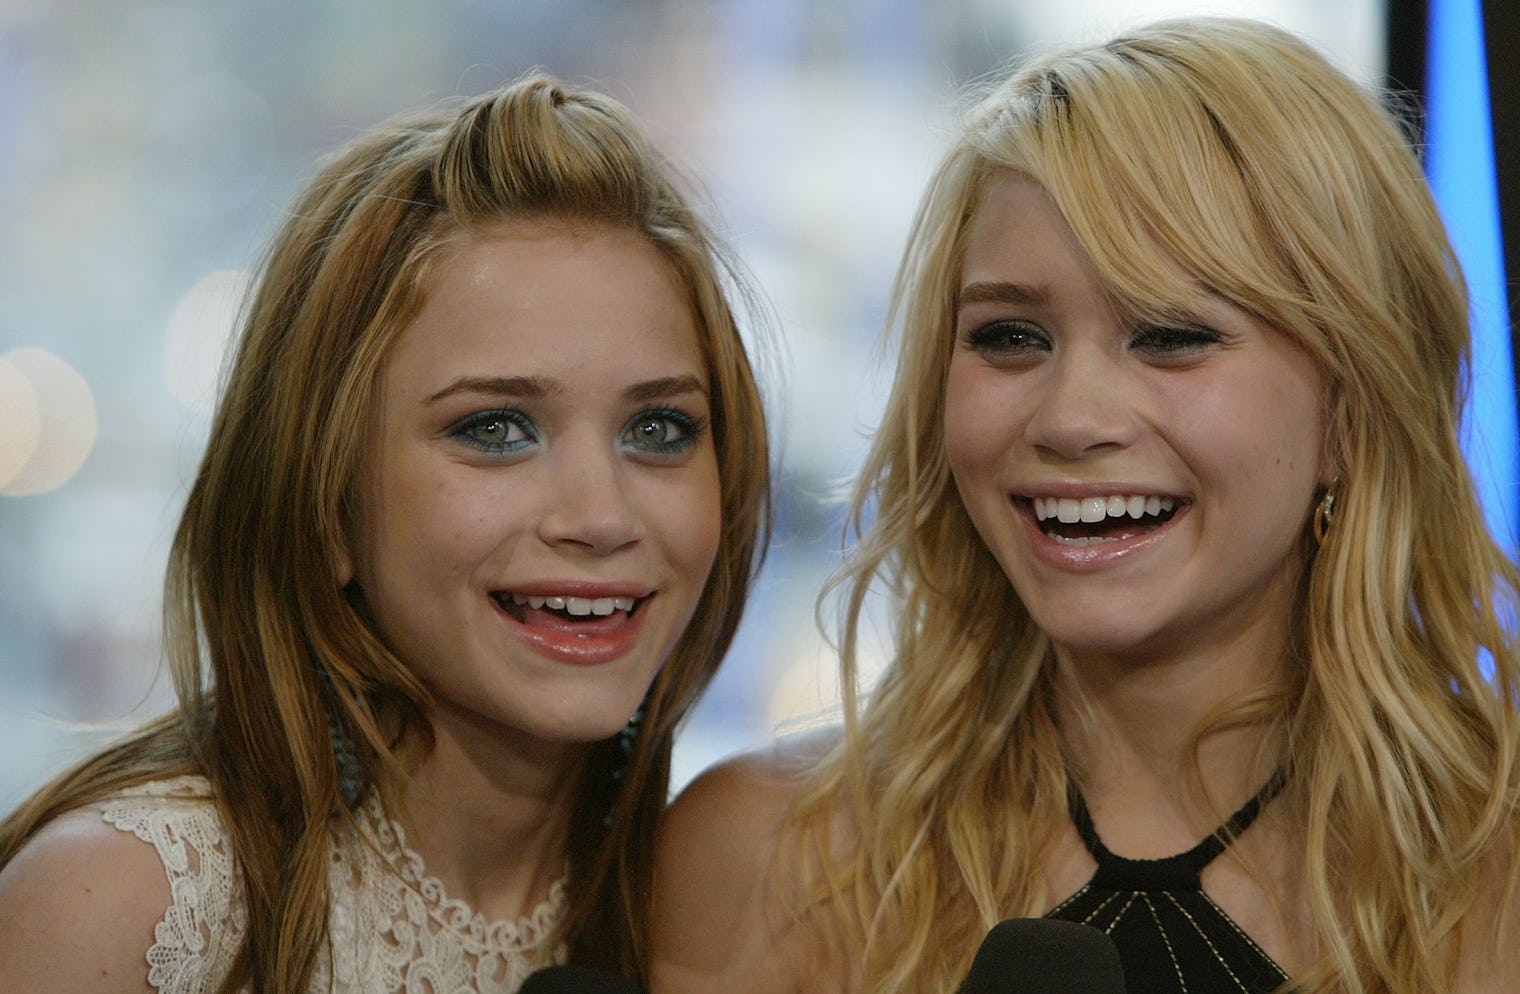 The 26 Times Mary Kate & Ashley Olsen Actually Smiled With Teeth — PHOTOS